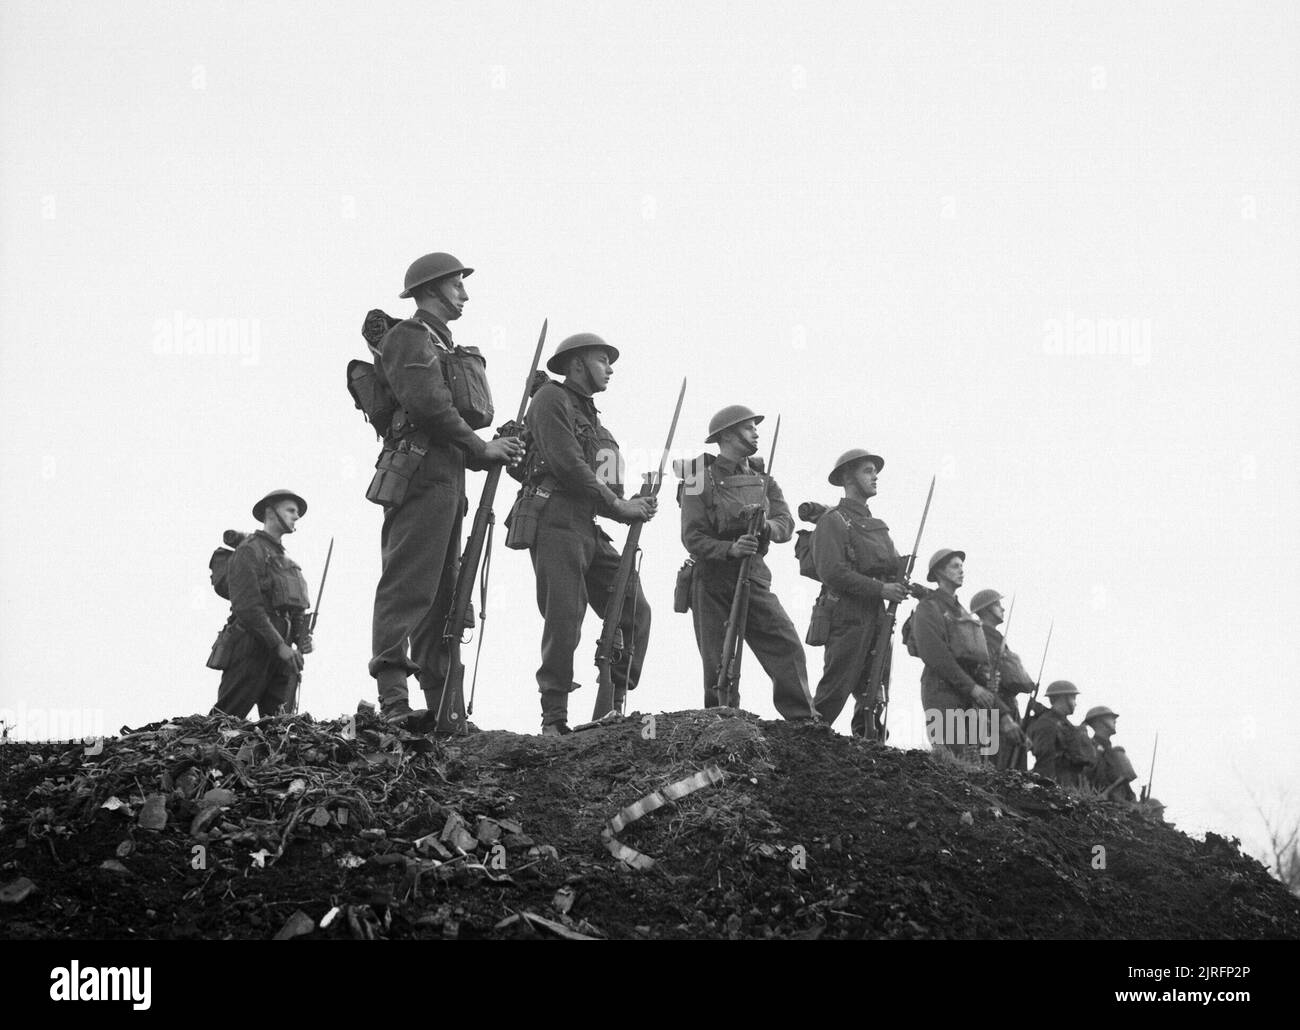 Soldiers of the East Surrey Regiment pose with fixed bayonets at Chatham in Kent, 25 November 1940. Soldiers of the East Surrey Regiment pose with fixed bayonets at Chatham in Kent, 25 November 1940. Stock Photo